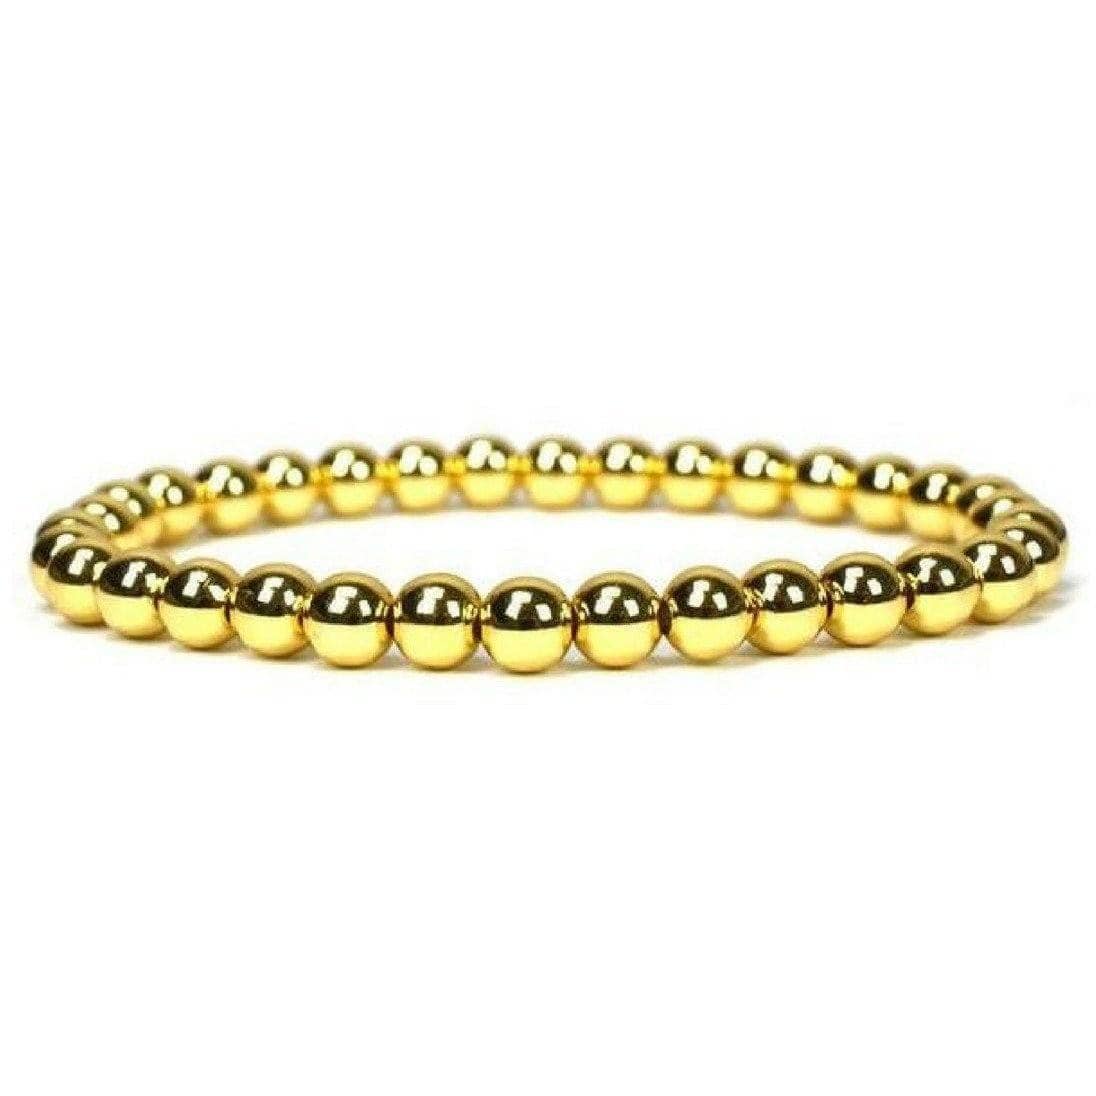 24KT Plated Beads - Man-ique Boutique